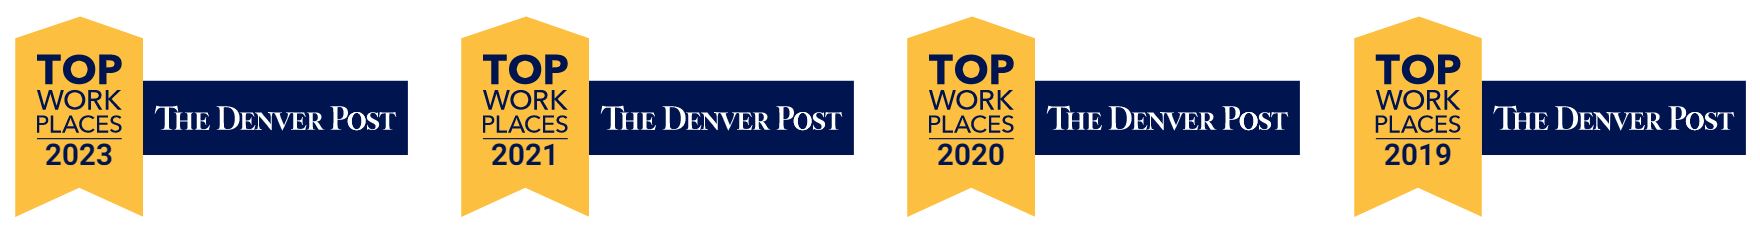 DSF Top Workplaces Awards